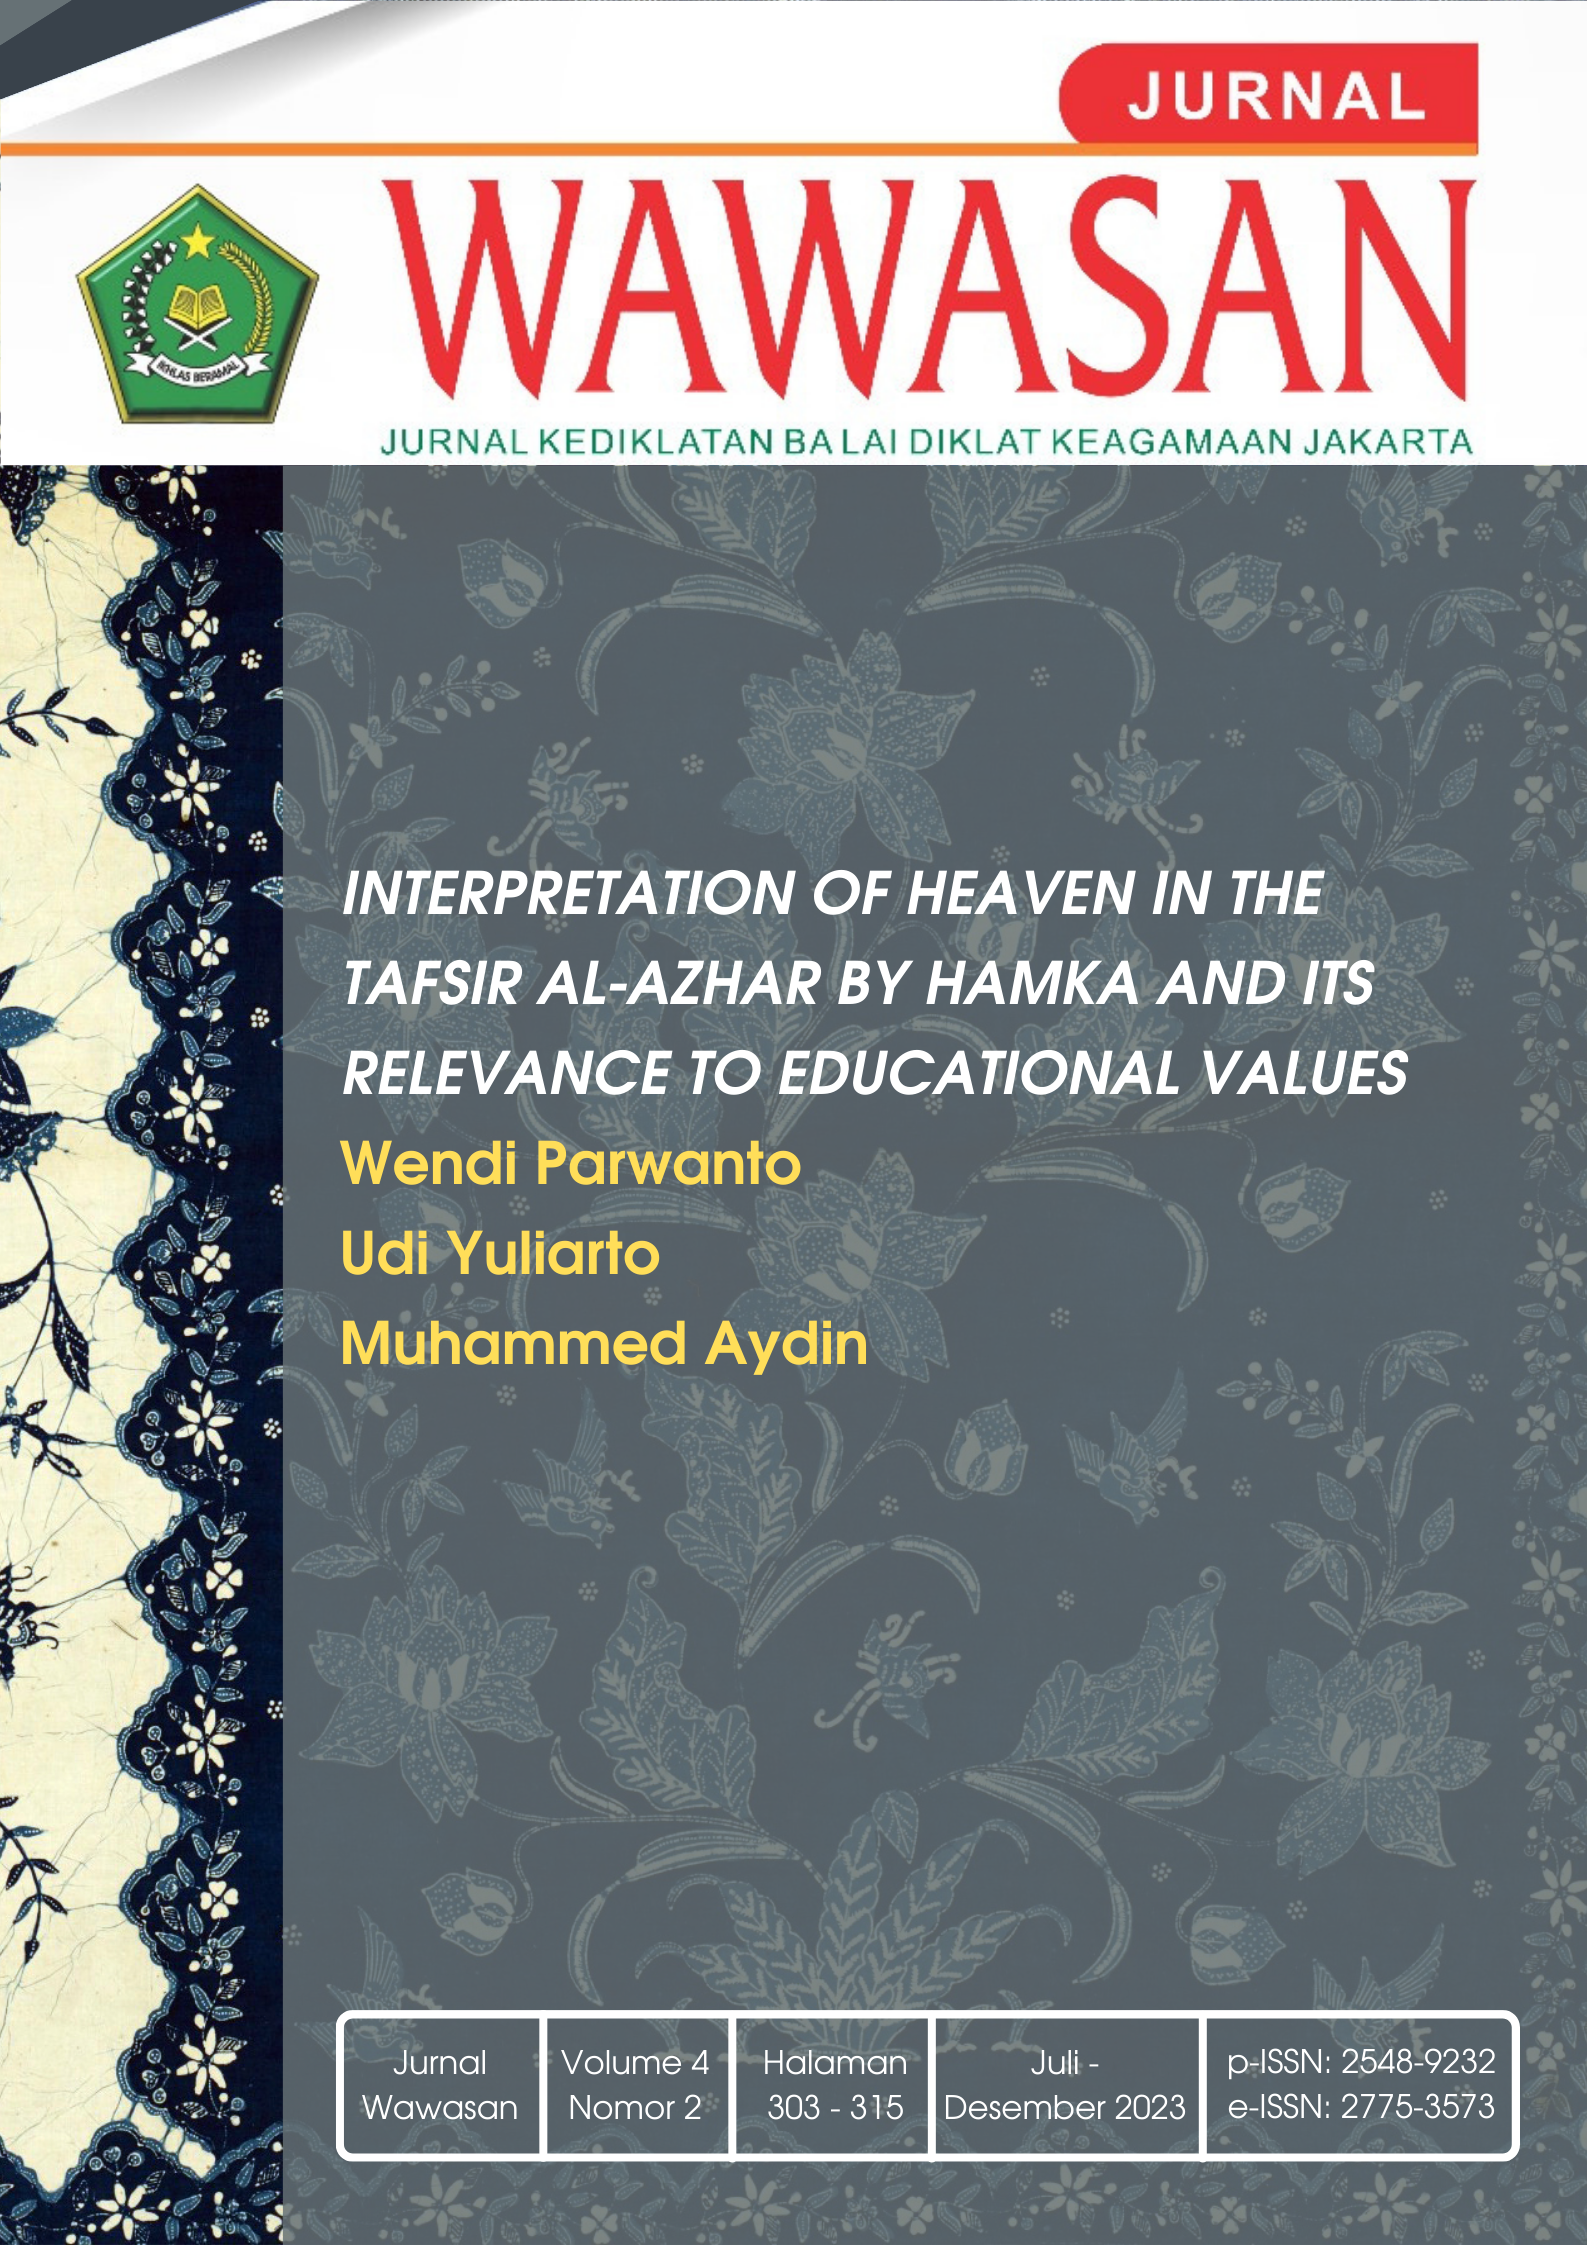 INTERPRETATION OF HEAVEN IN THE TAFSIR AL-AZHAR BY HAMKA AND ITS RELEVANCE TO EDUCATIONAL VALUES